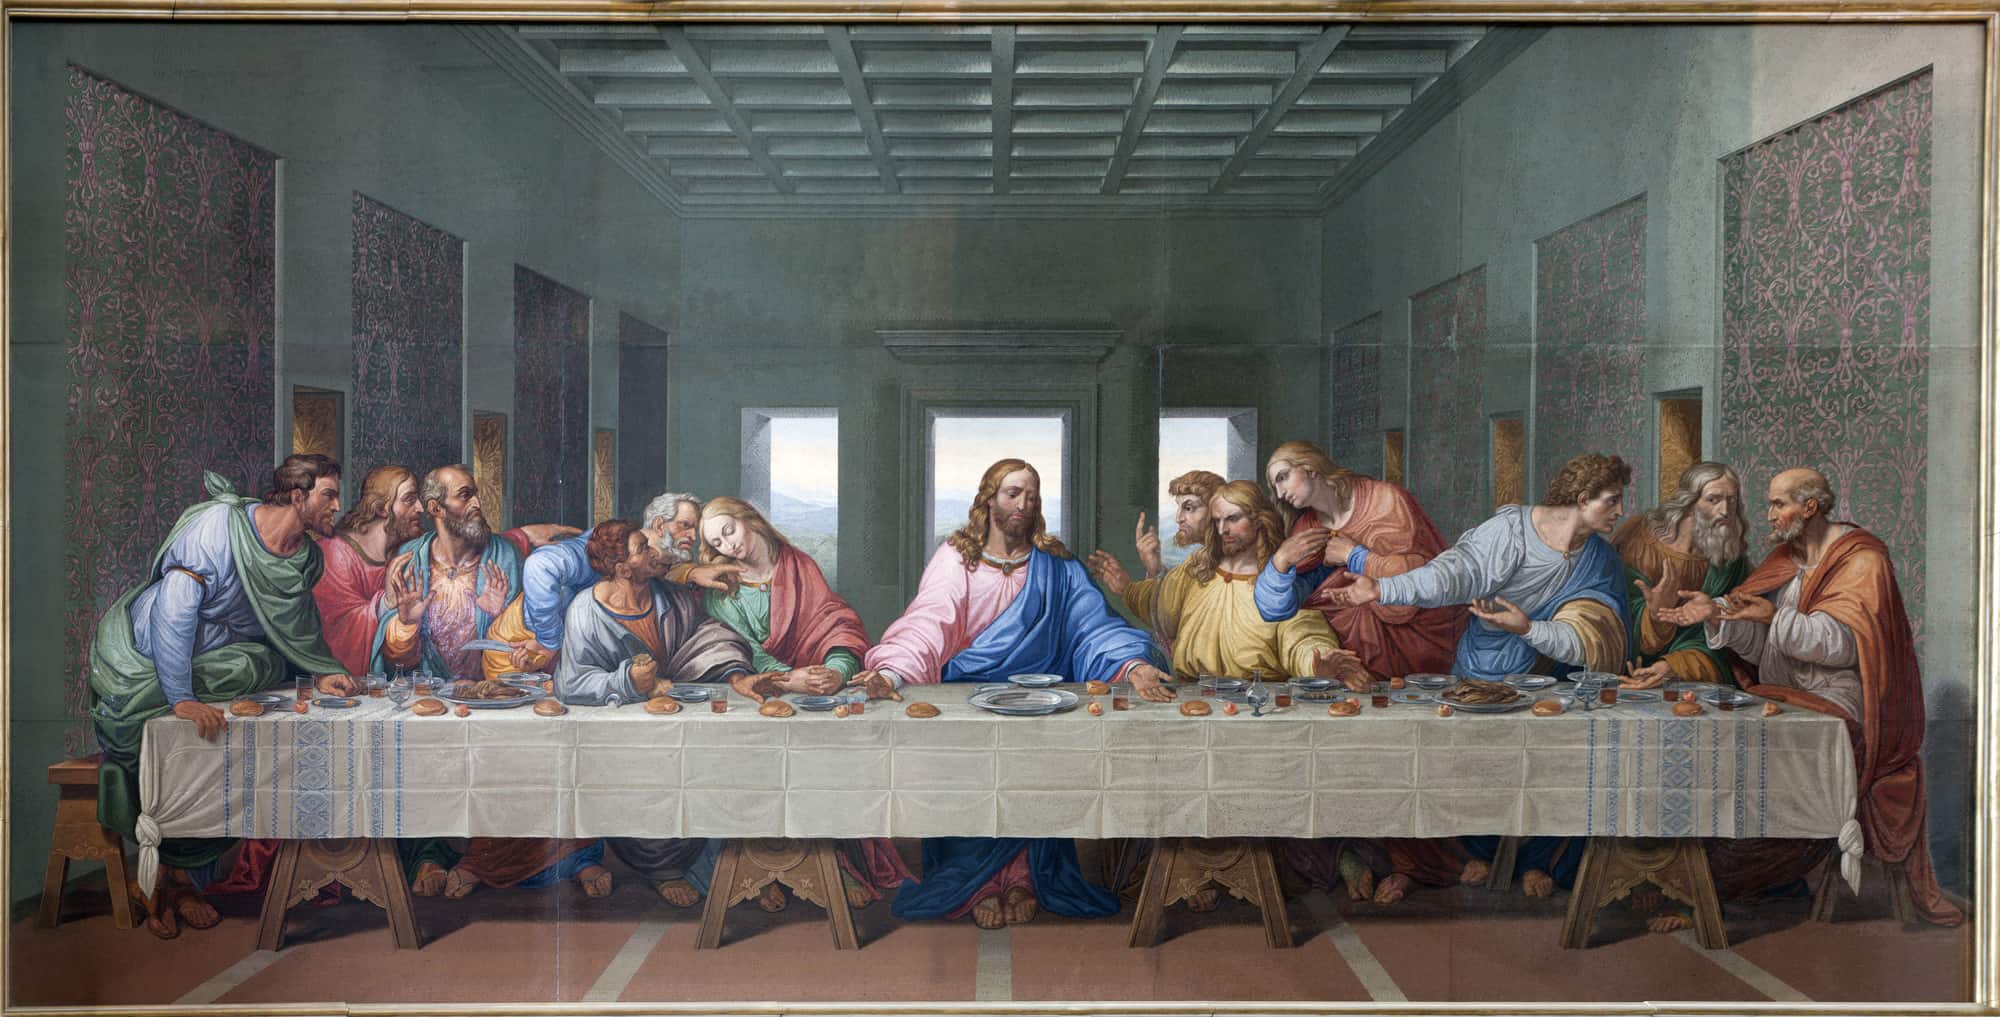 Milan, Attractions Archive, Milan-Attractions-Last-Supper.